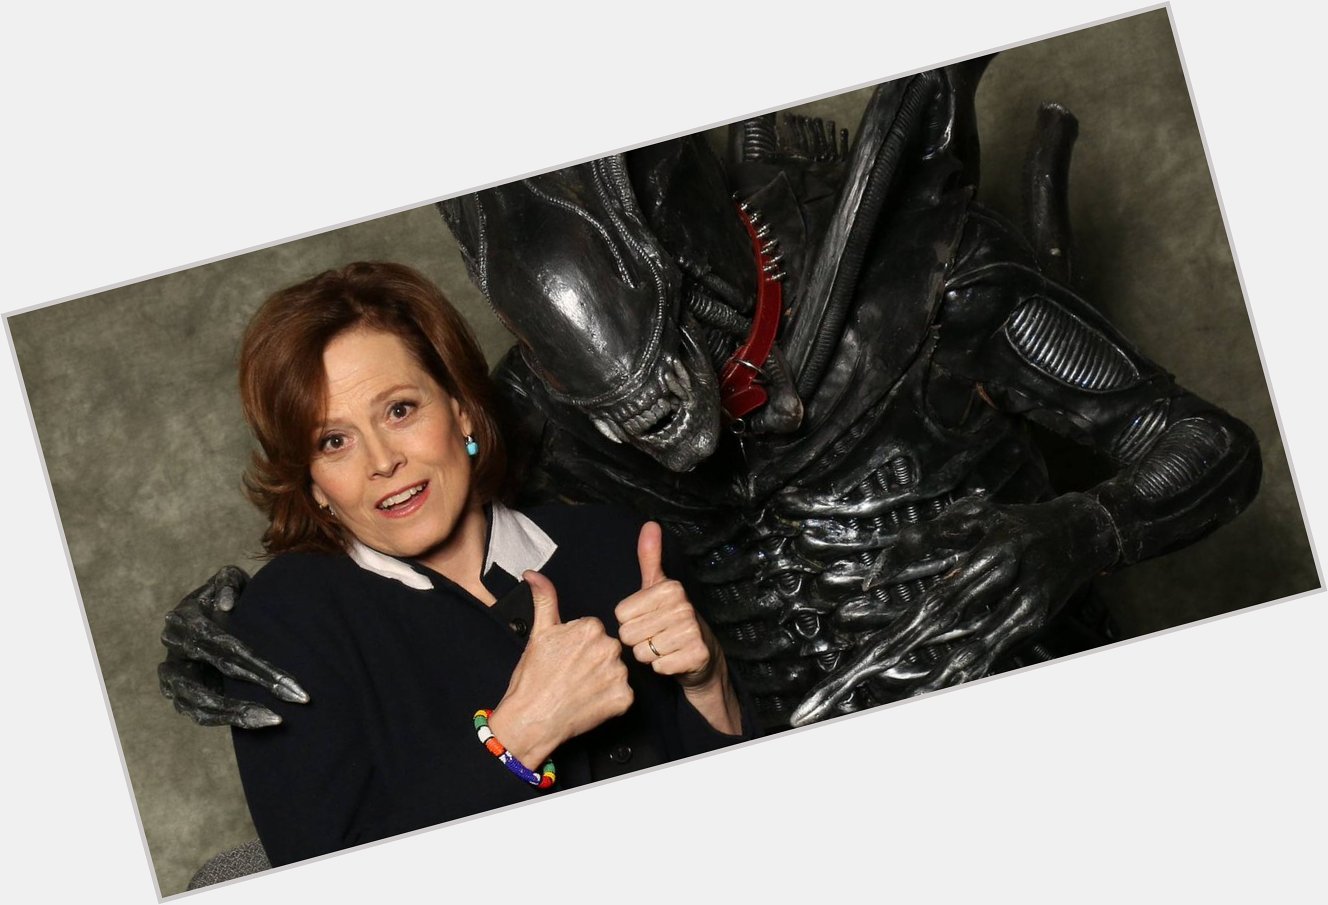 Happy Birthday to the ONE and ONLY Sigourney Weaver!

- Team SWSCA 